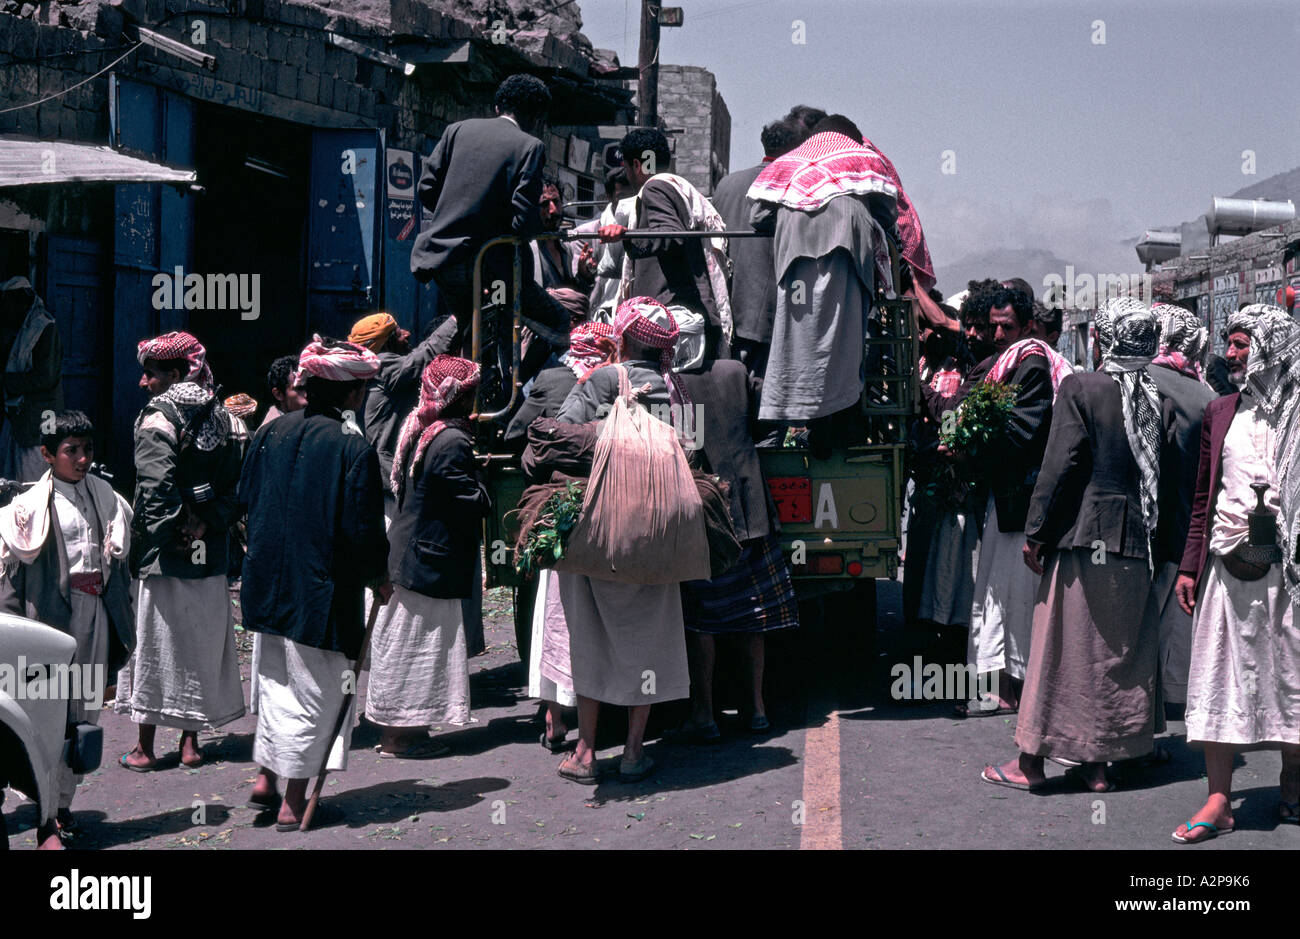 Yemen men buying their afternoon supply of qat from lorry Stock Photo